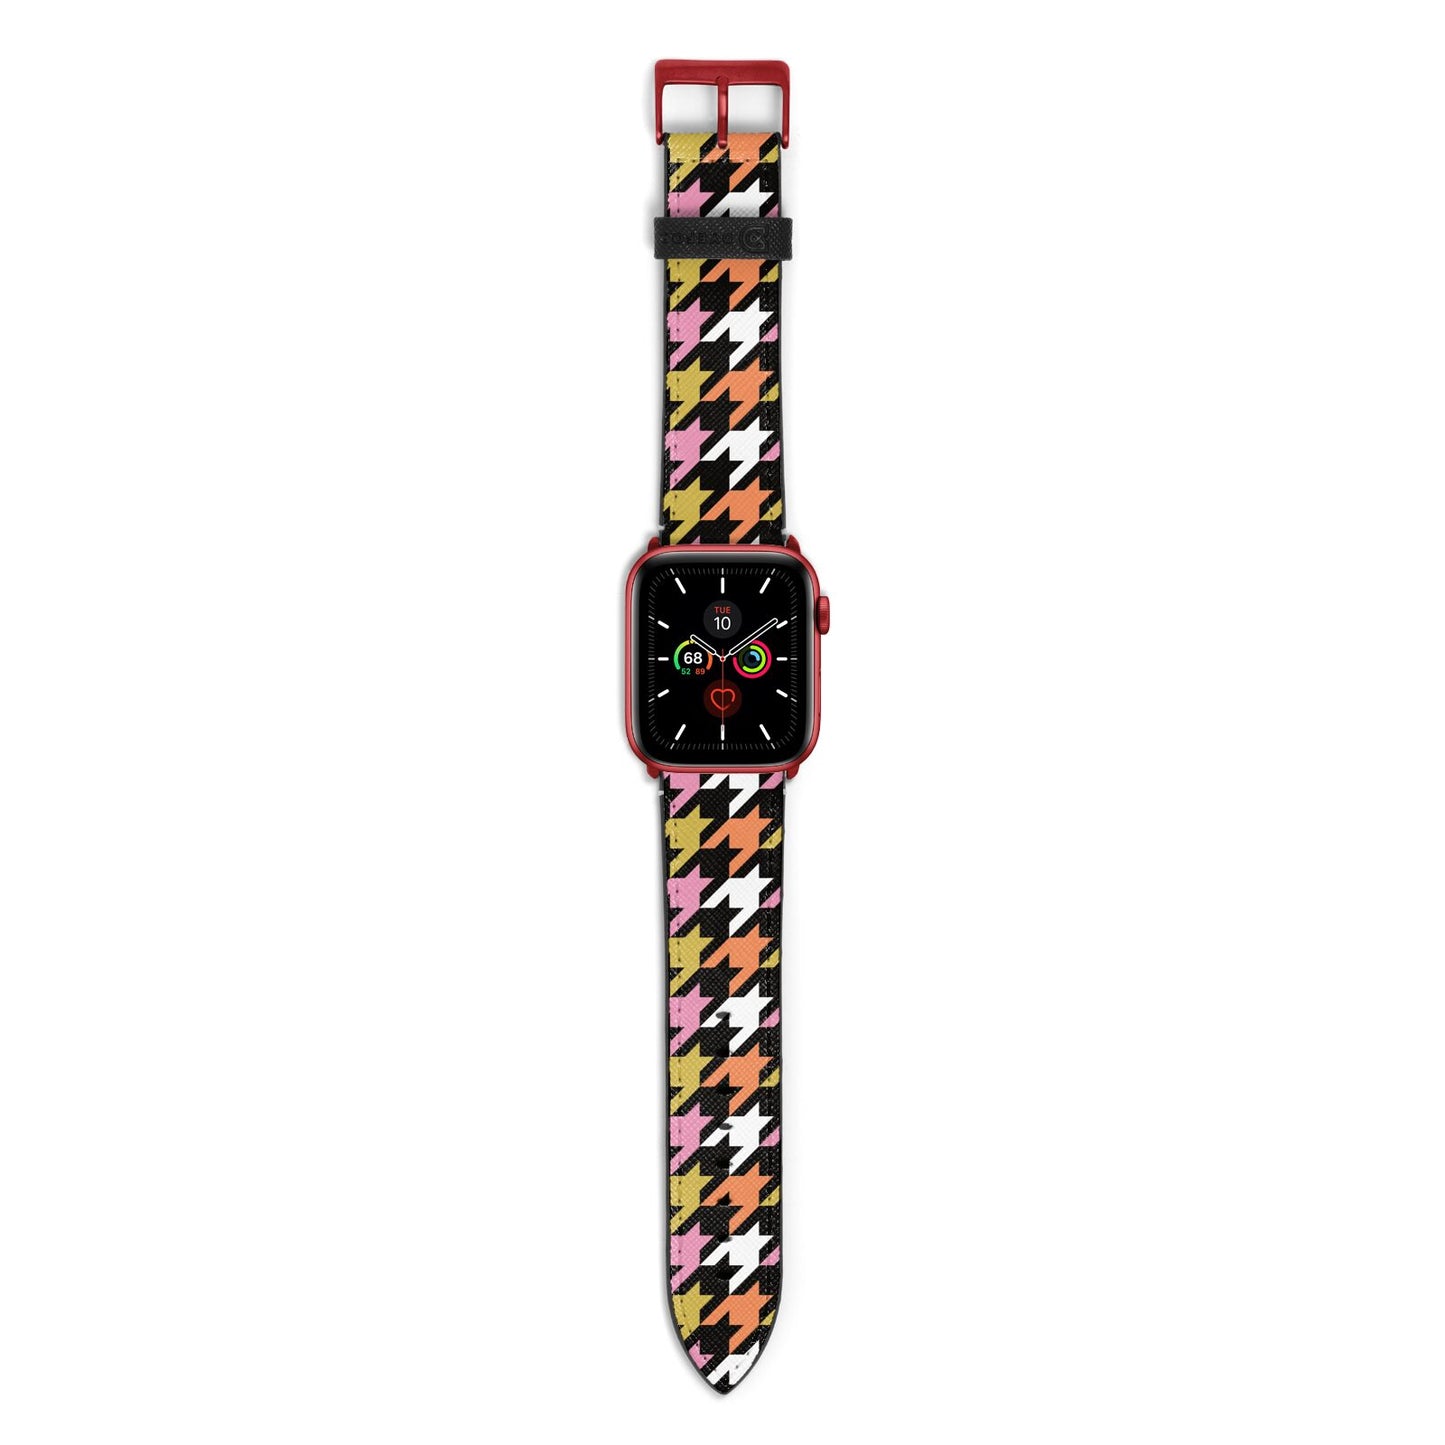 Retro Houndstooth Apple Watch Strap with Red Hardware